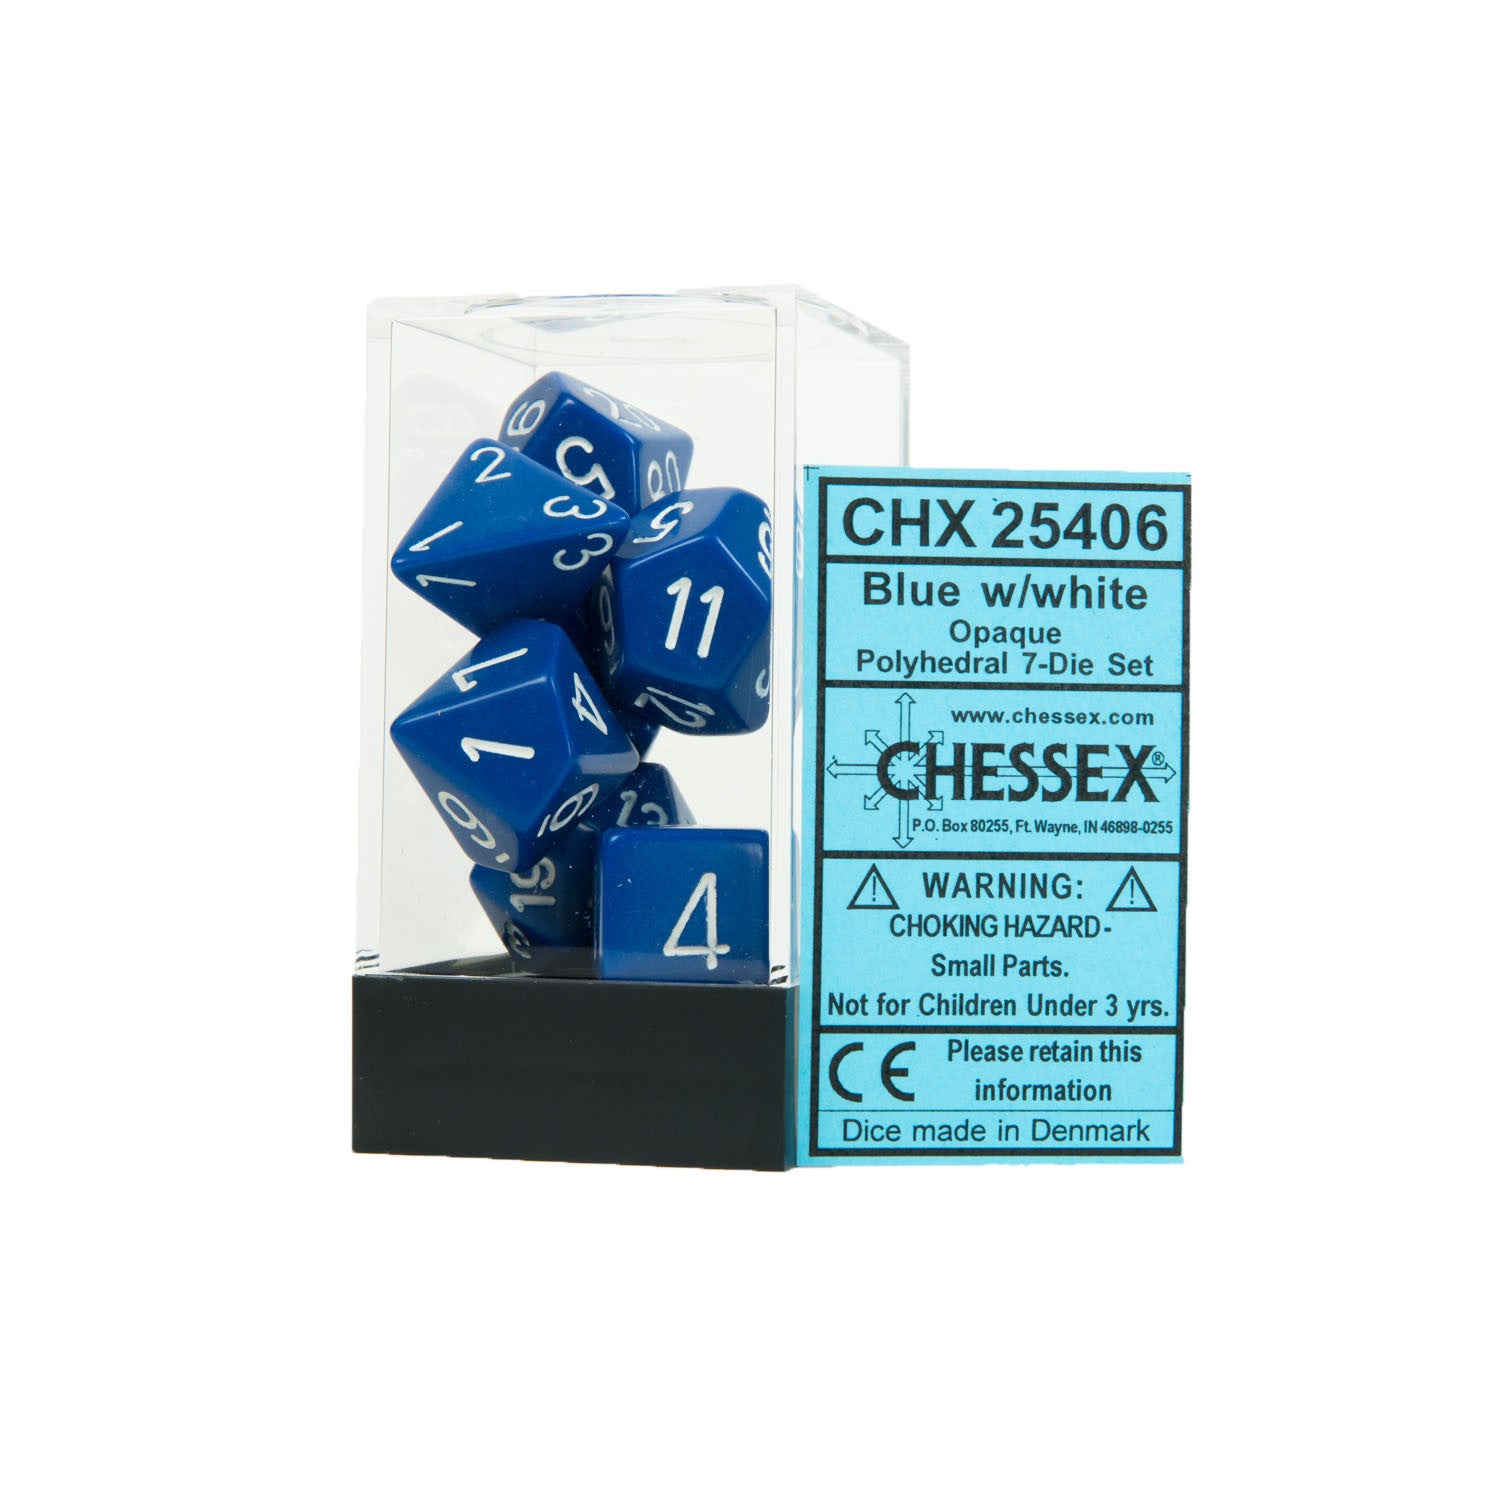 Chessex CHX25406 Opaque Blue w/white Polyhedral Dice Set